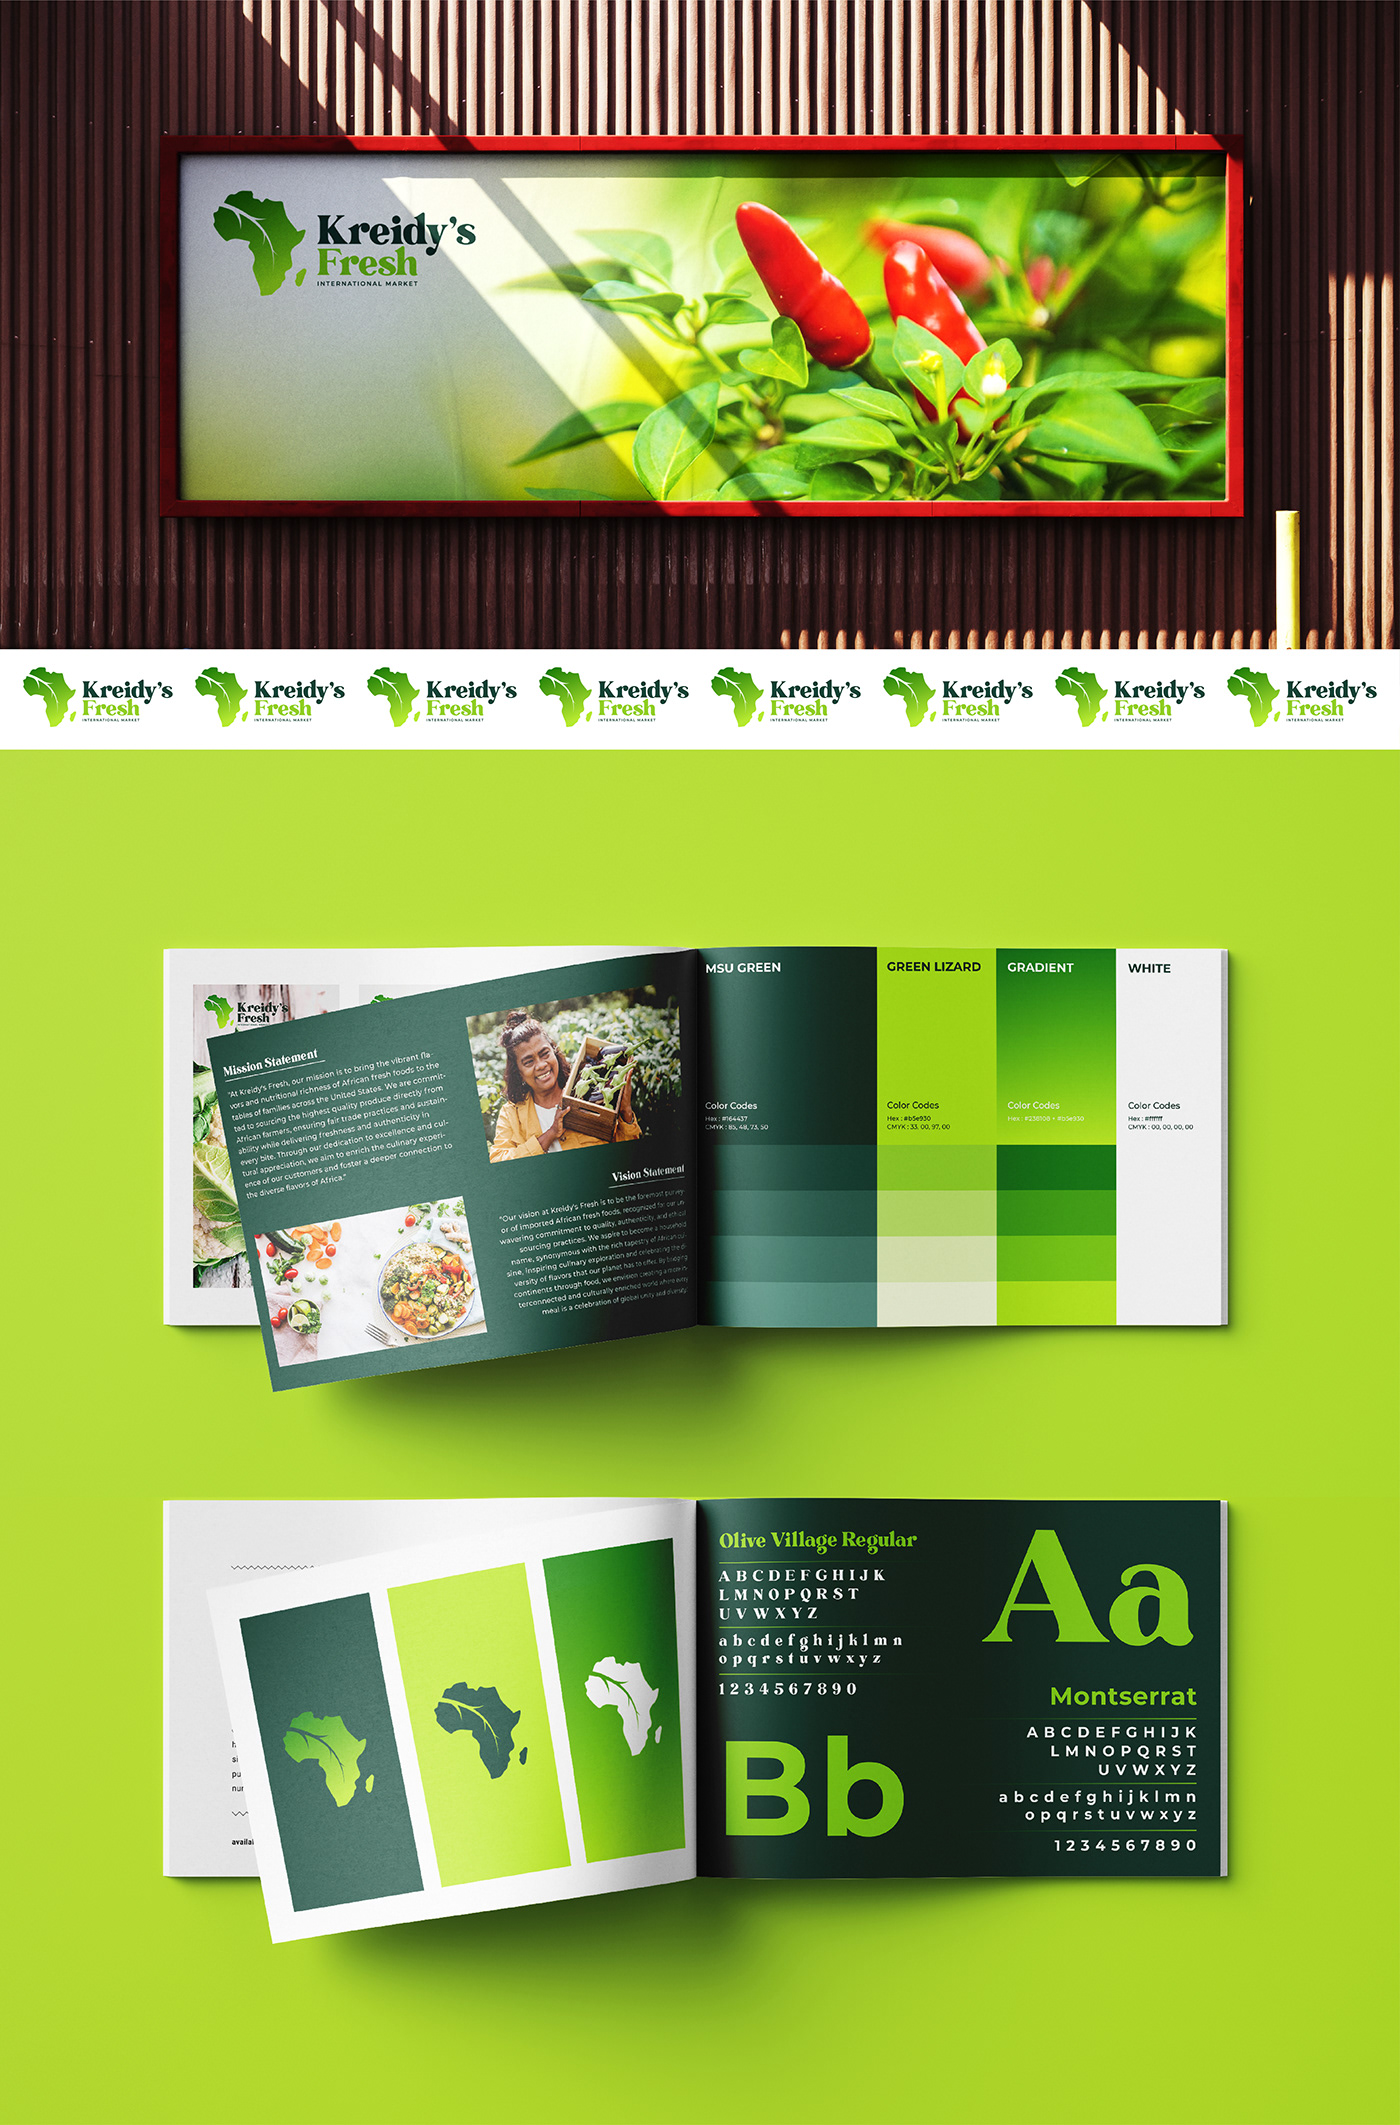 This is an organic food brand logo and brand identity.